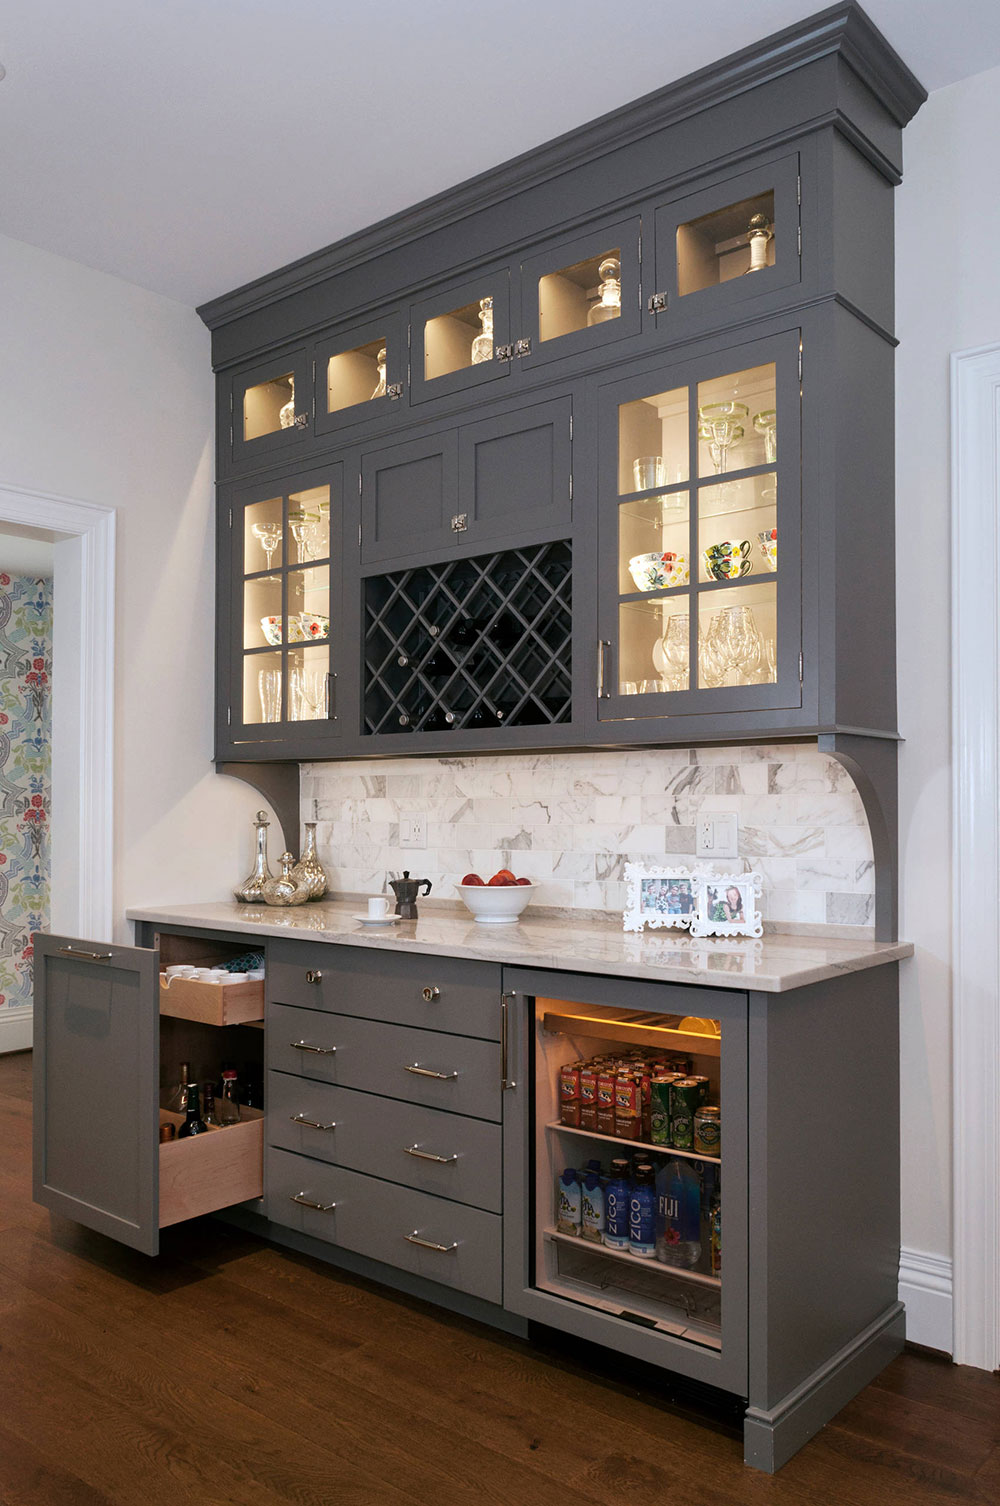 What To Do With Old Kitchen Cabinets Repurposed Cabinets Ideas